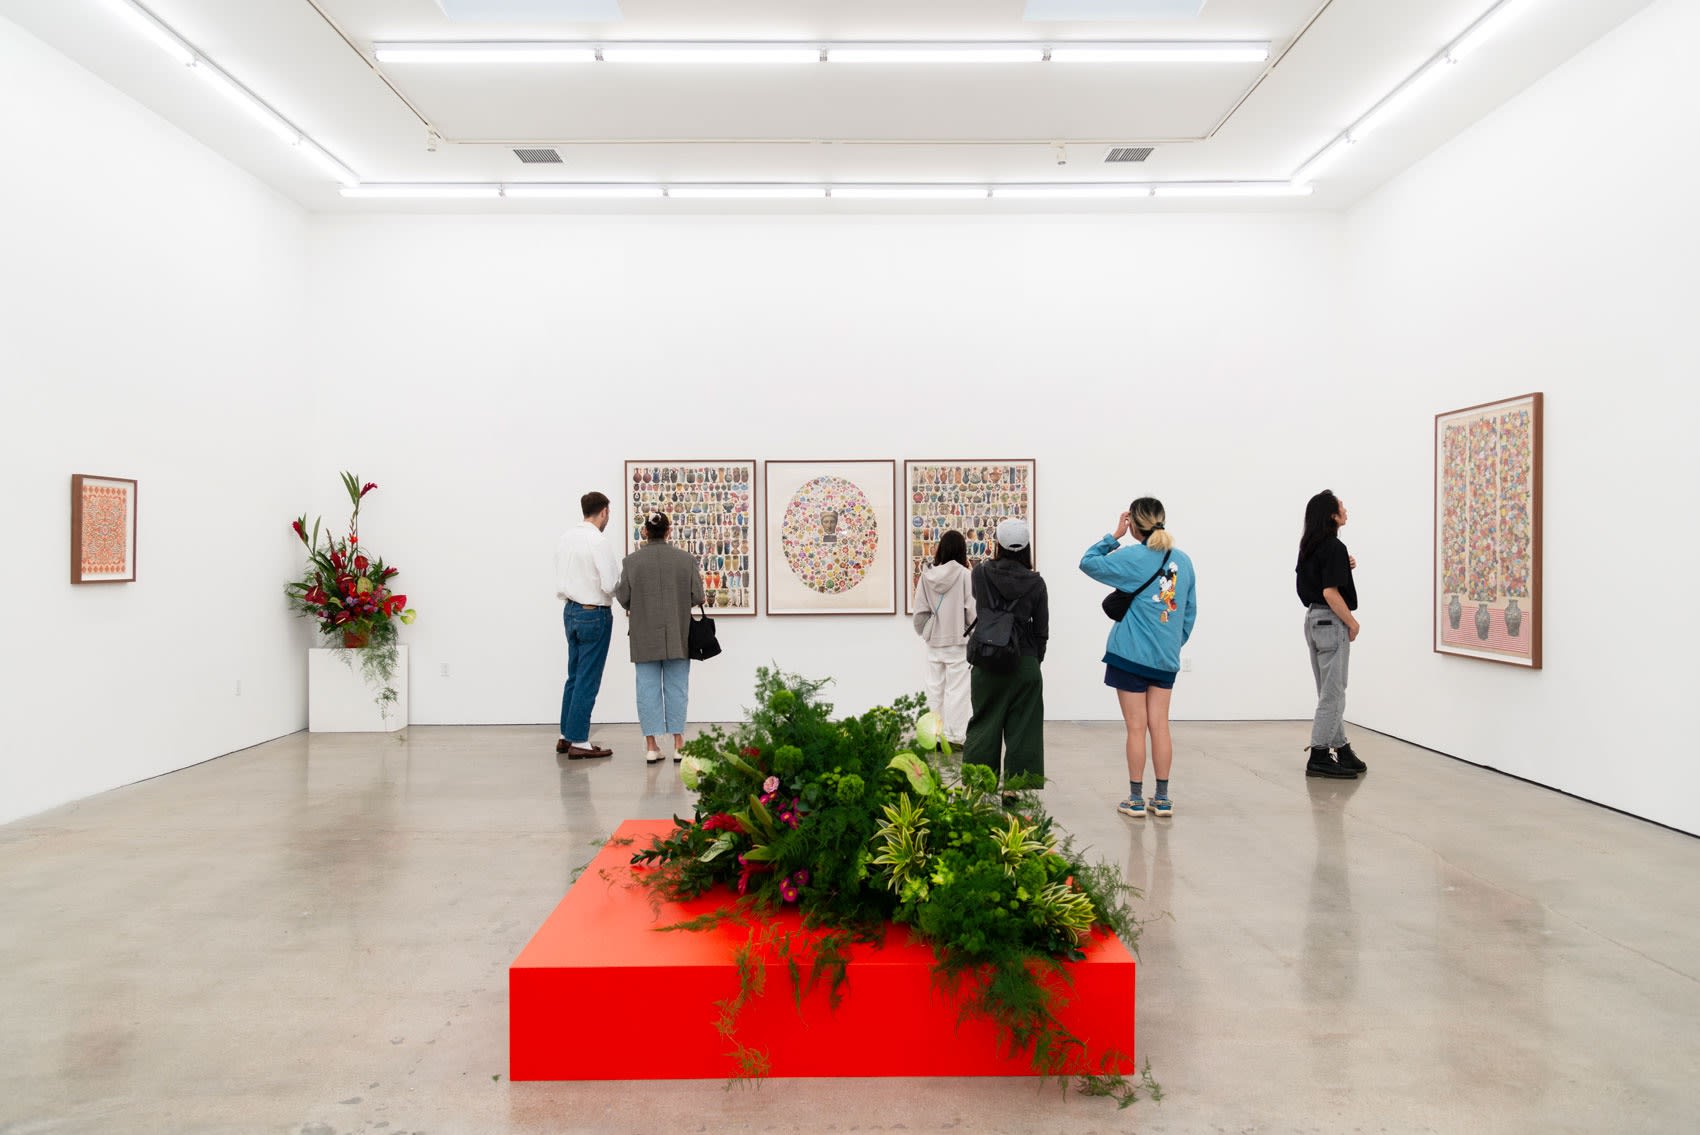 Attendees of matthew Craven's solo show look at the large collage and drawn works on paper in a white cube gallery space with concrete floors. A floral installation on a brighr red pedestal is in the middle of the room 